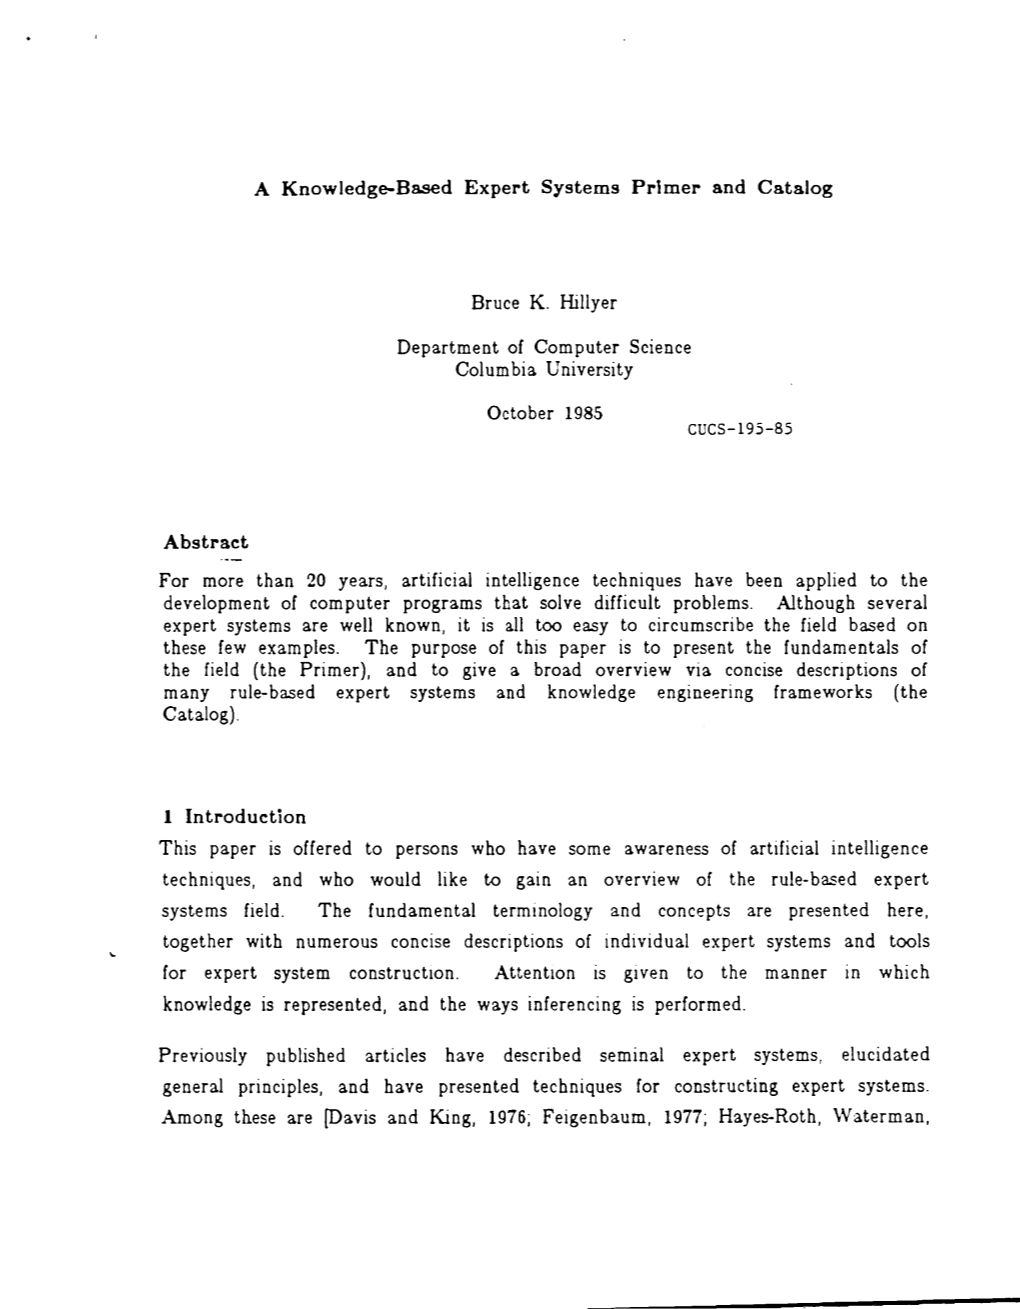 A Knowledge-Based Expert Systems Primer and Catalog Abstract 1